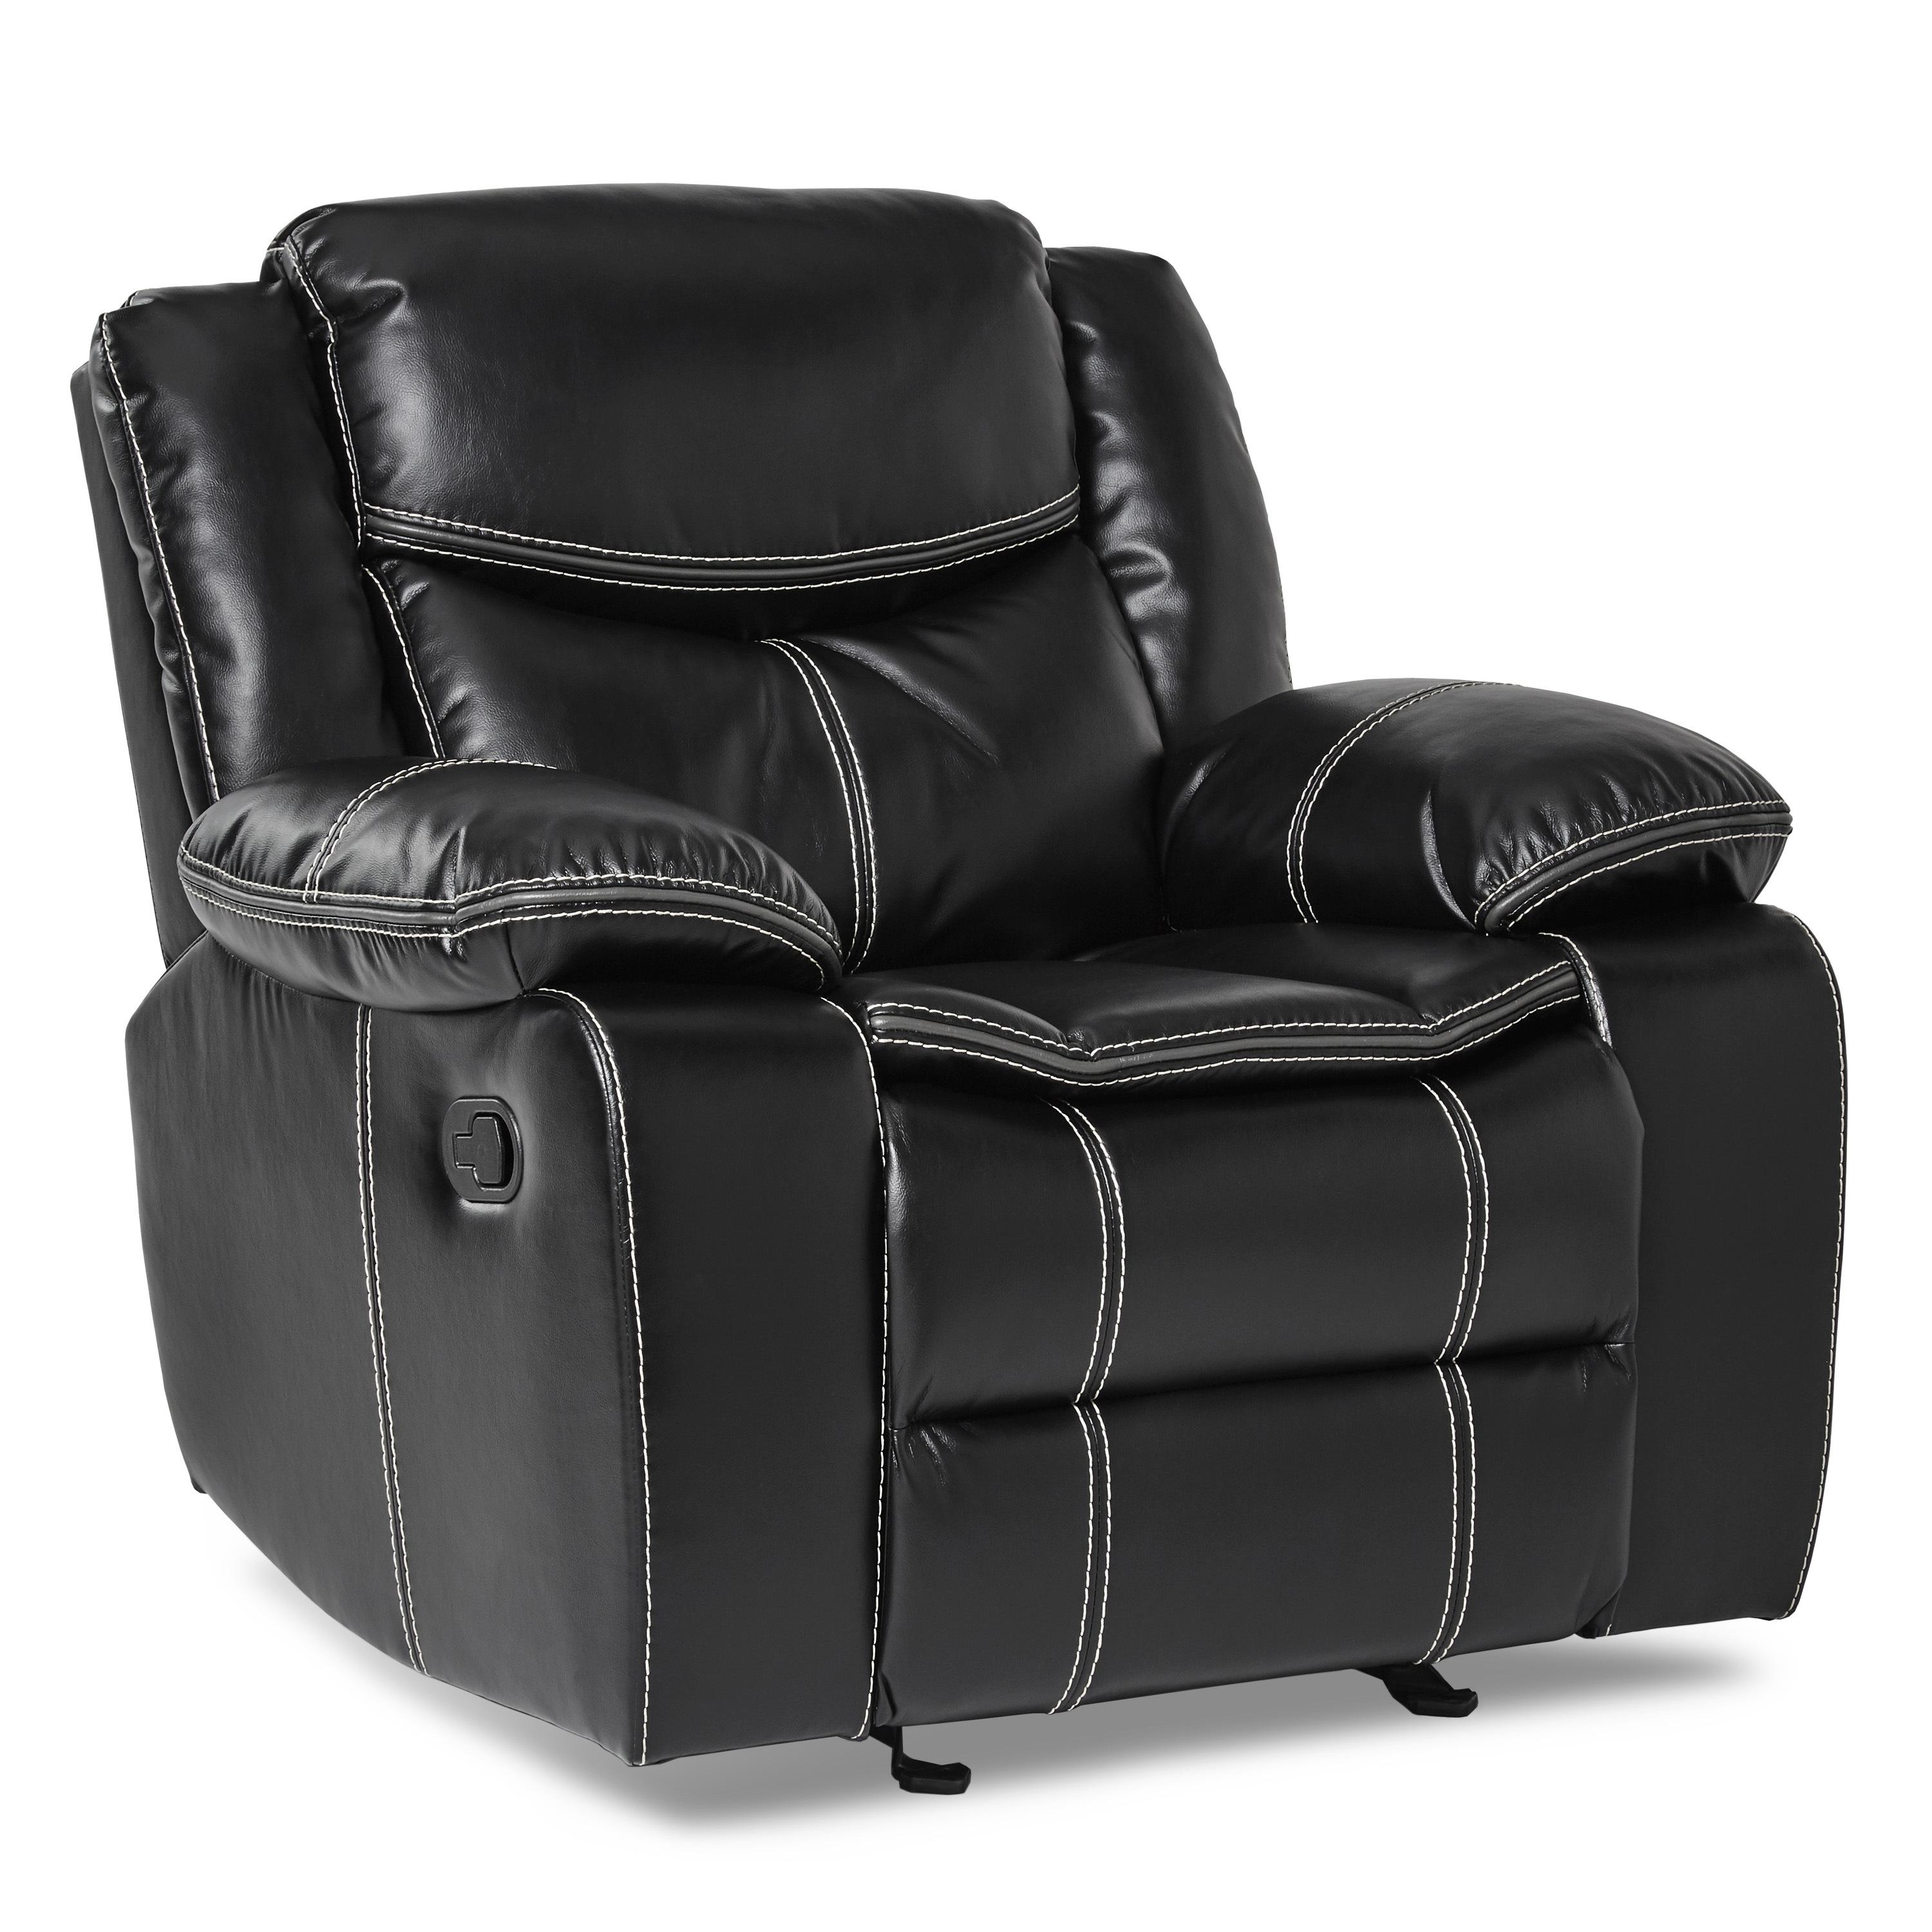 

    
Transitional Black Faux Leather Reclining Chair Homelegance 8230BLK-1 Bastrop
